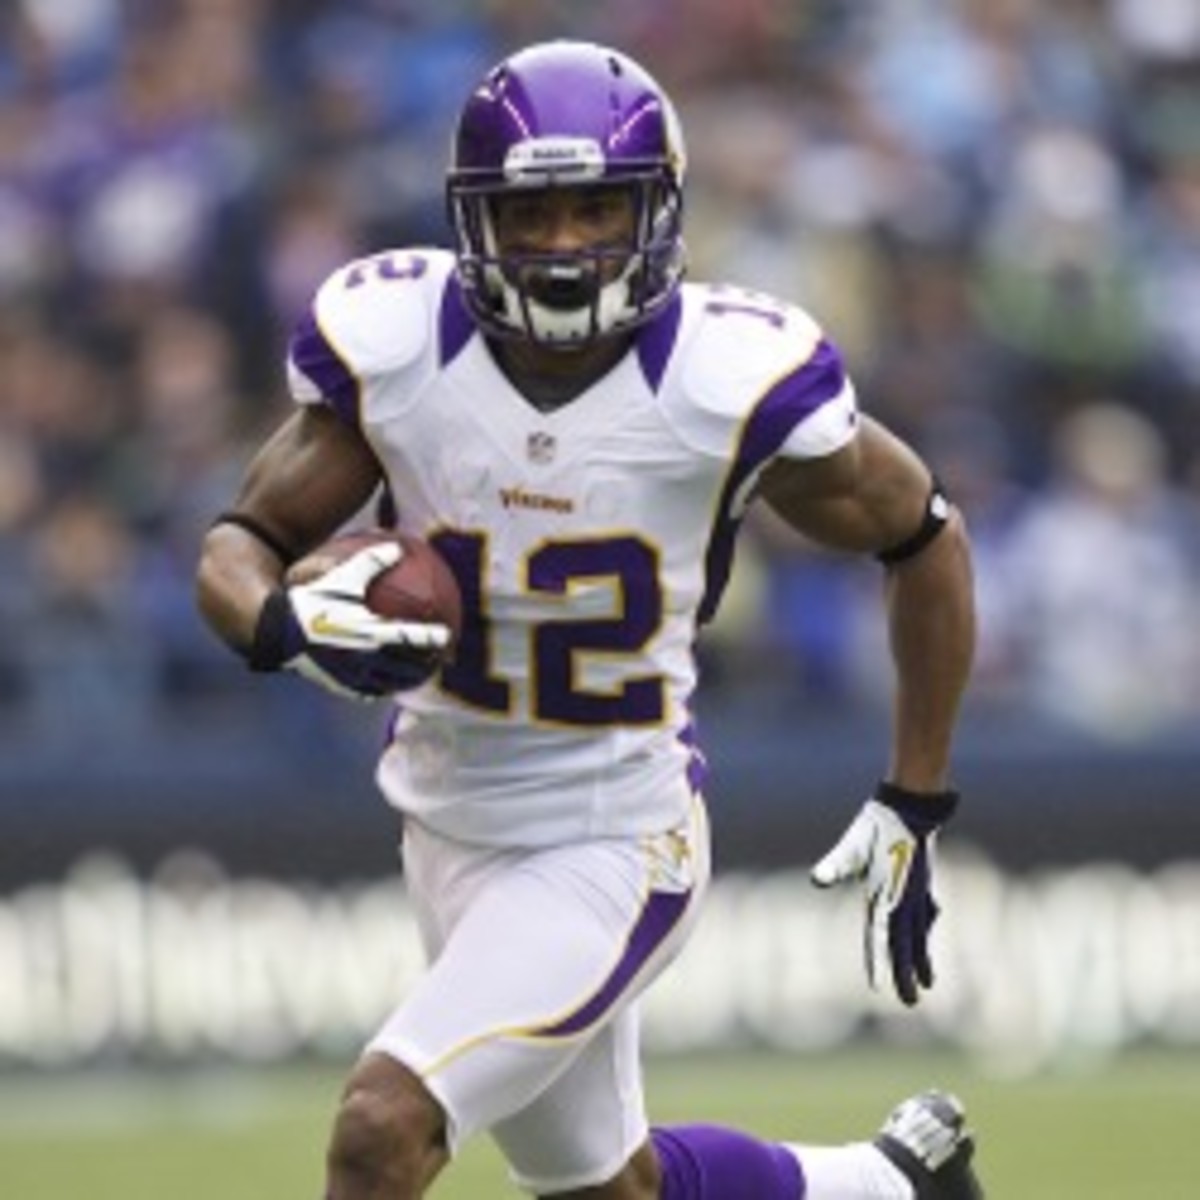 Vikings wideout Percy Harvin had nothing to say when asked about trade rumors.(Stephen Brashear/Getty Images)